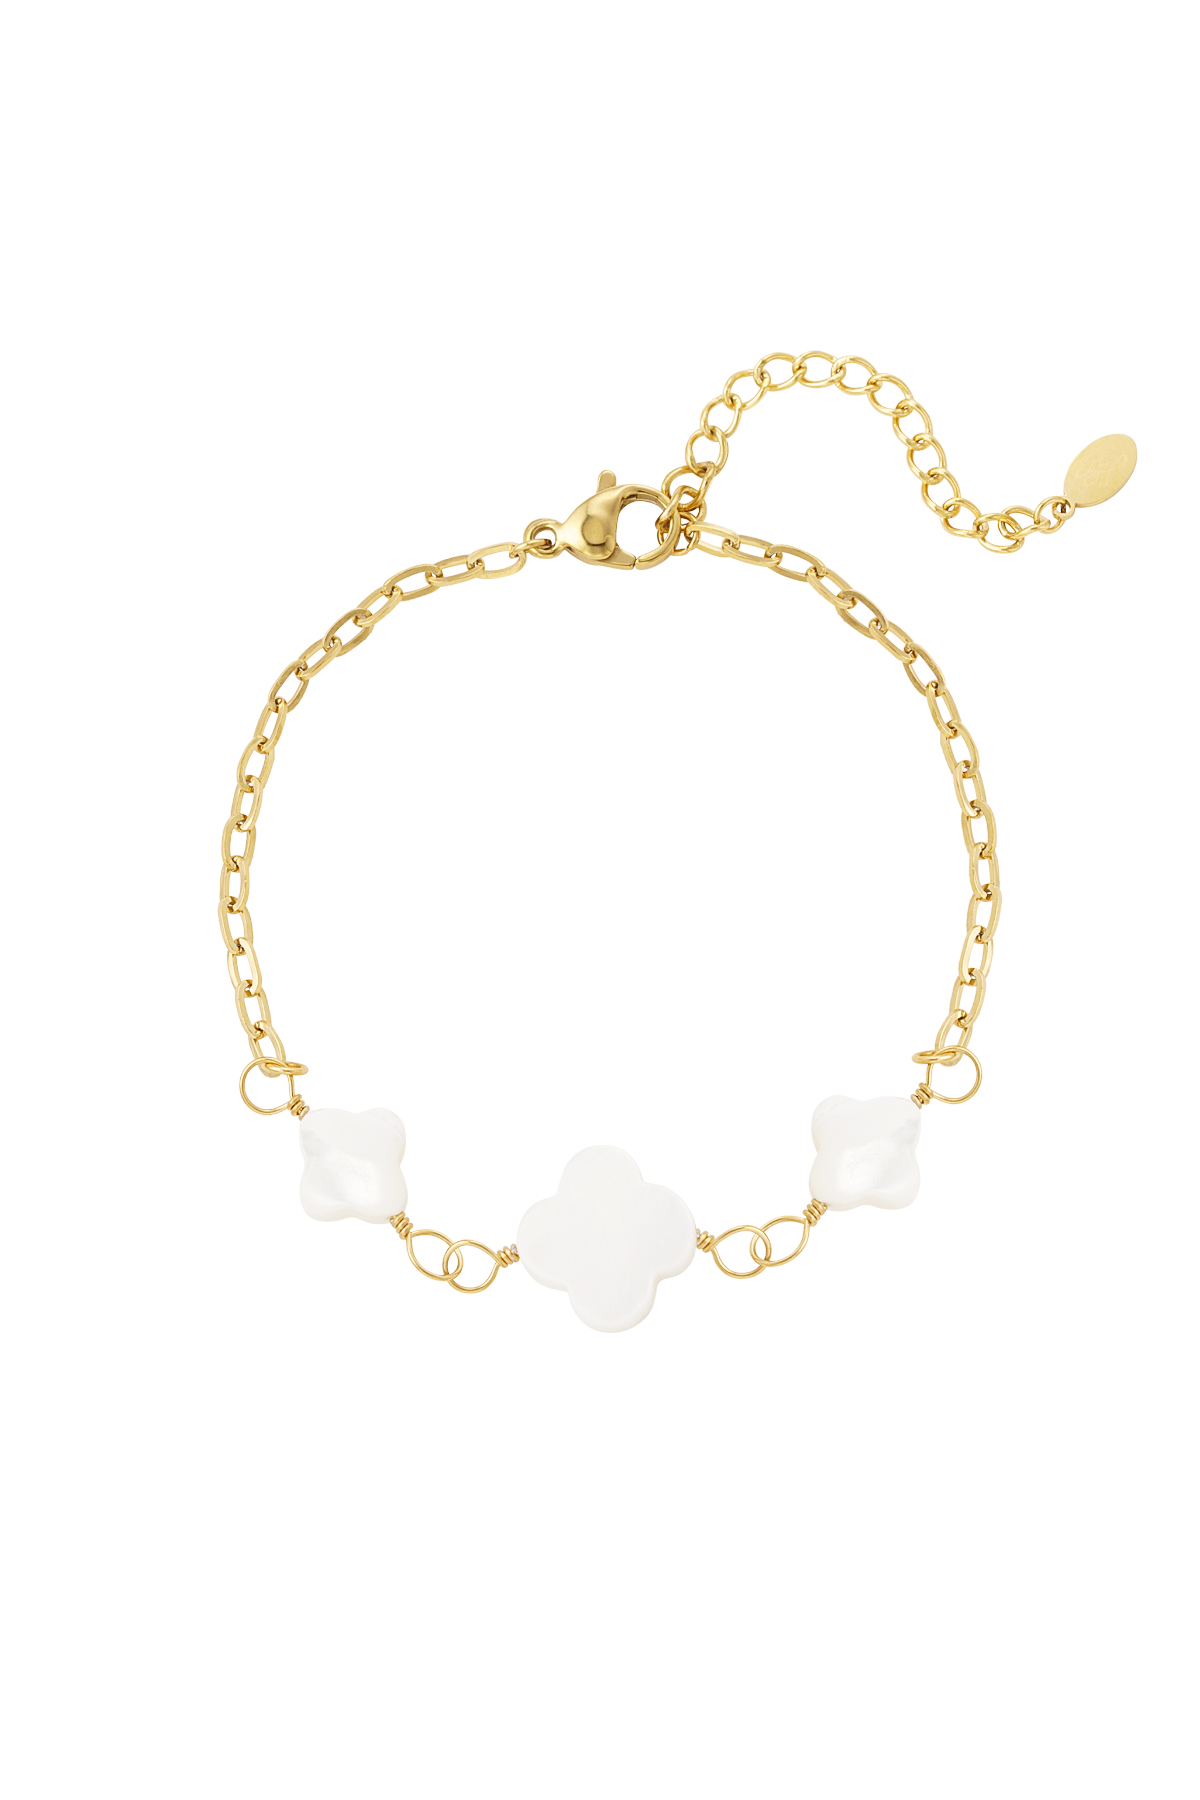 Bracelet with clovers - gold h5 